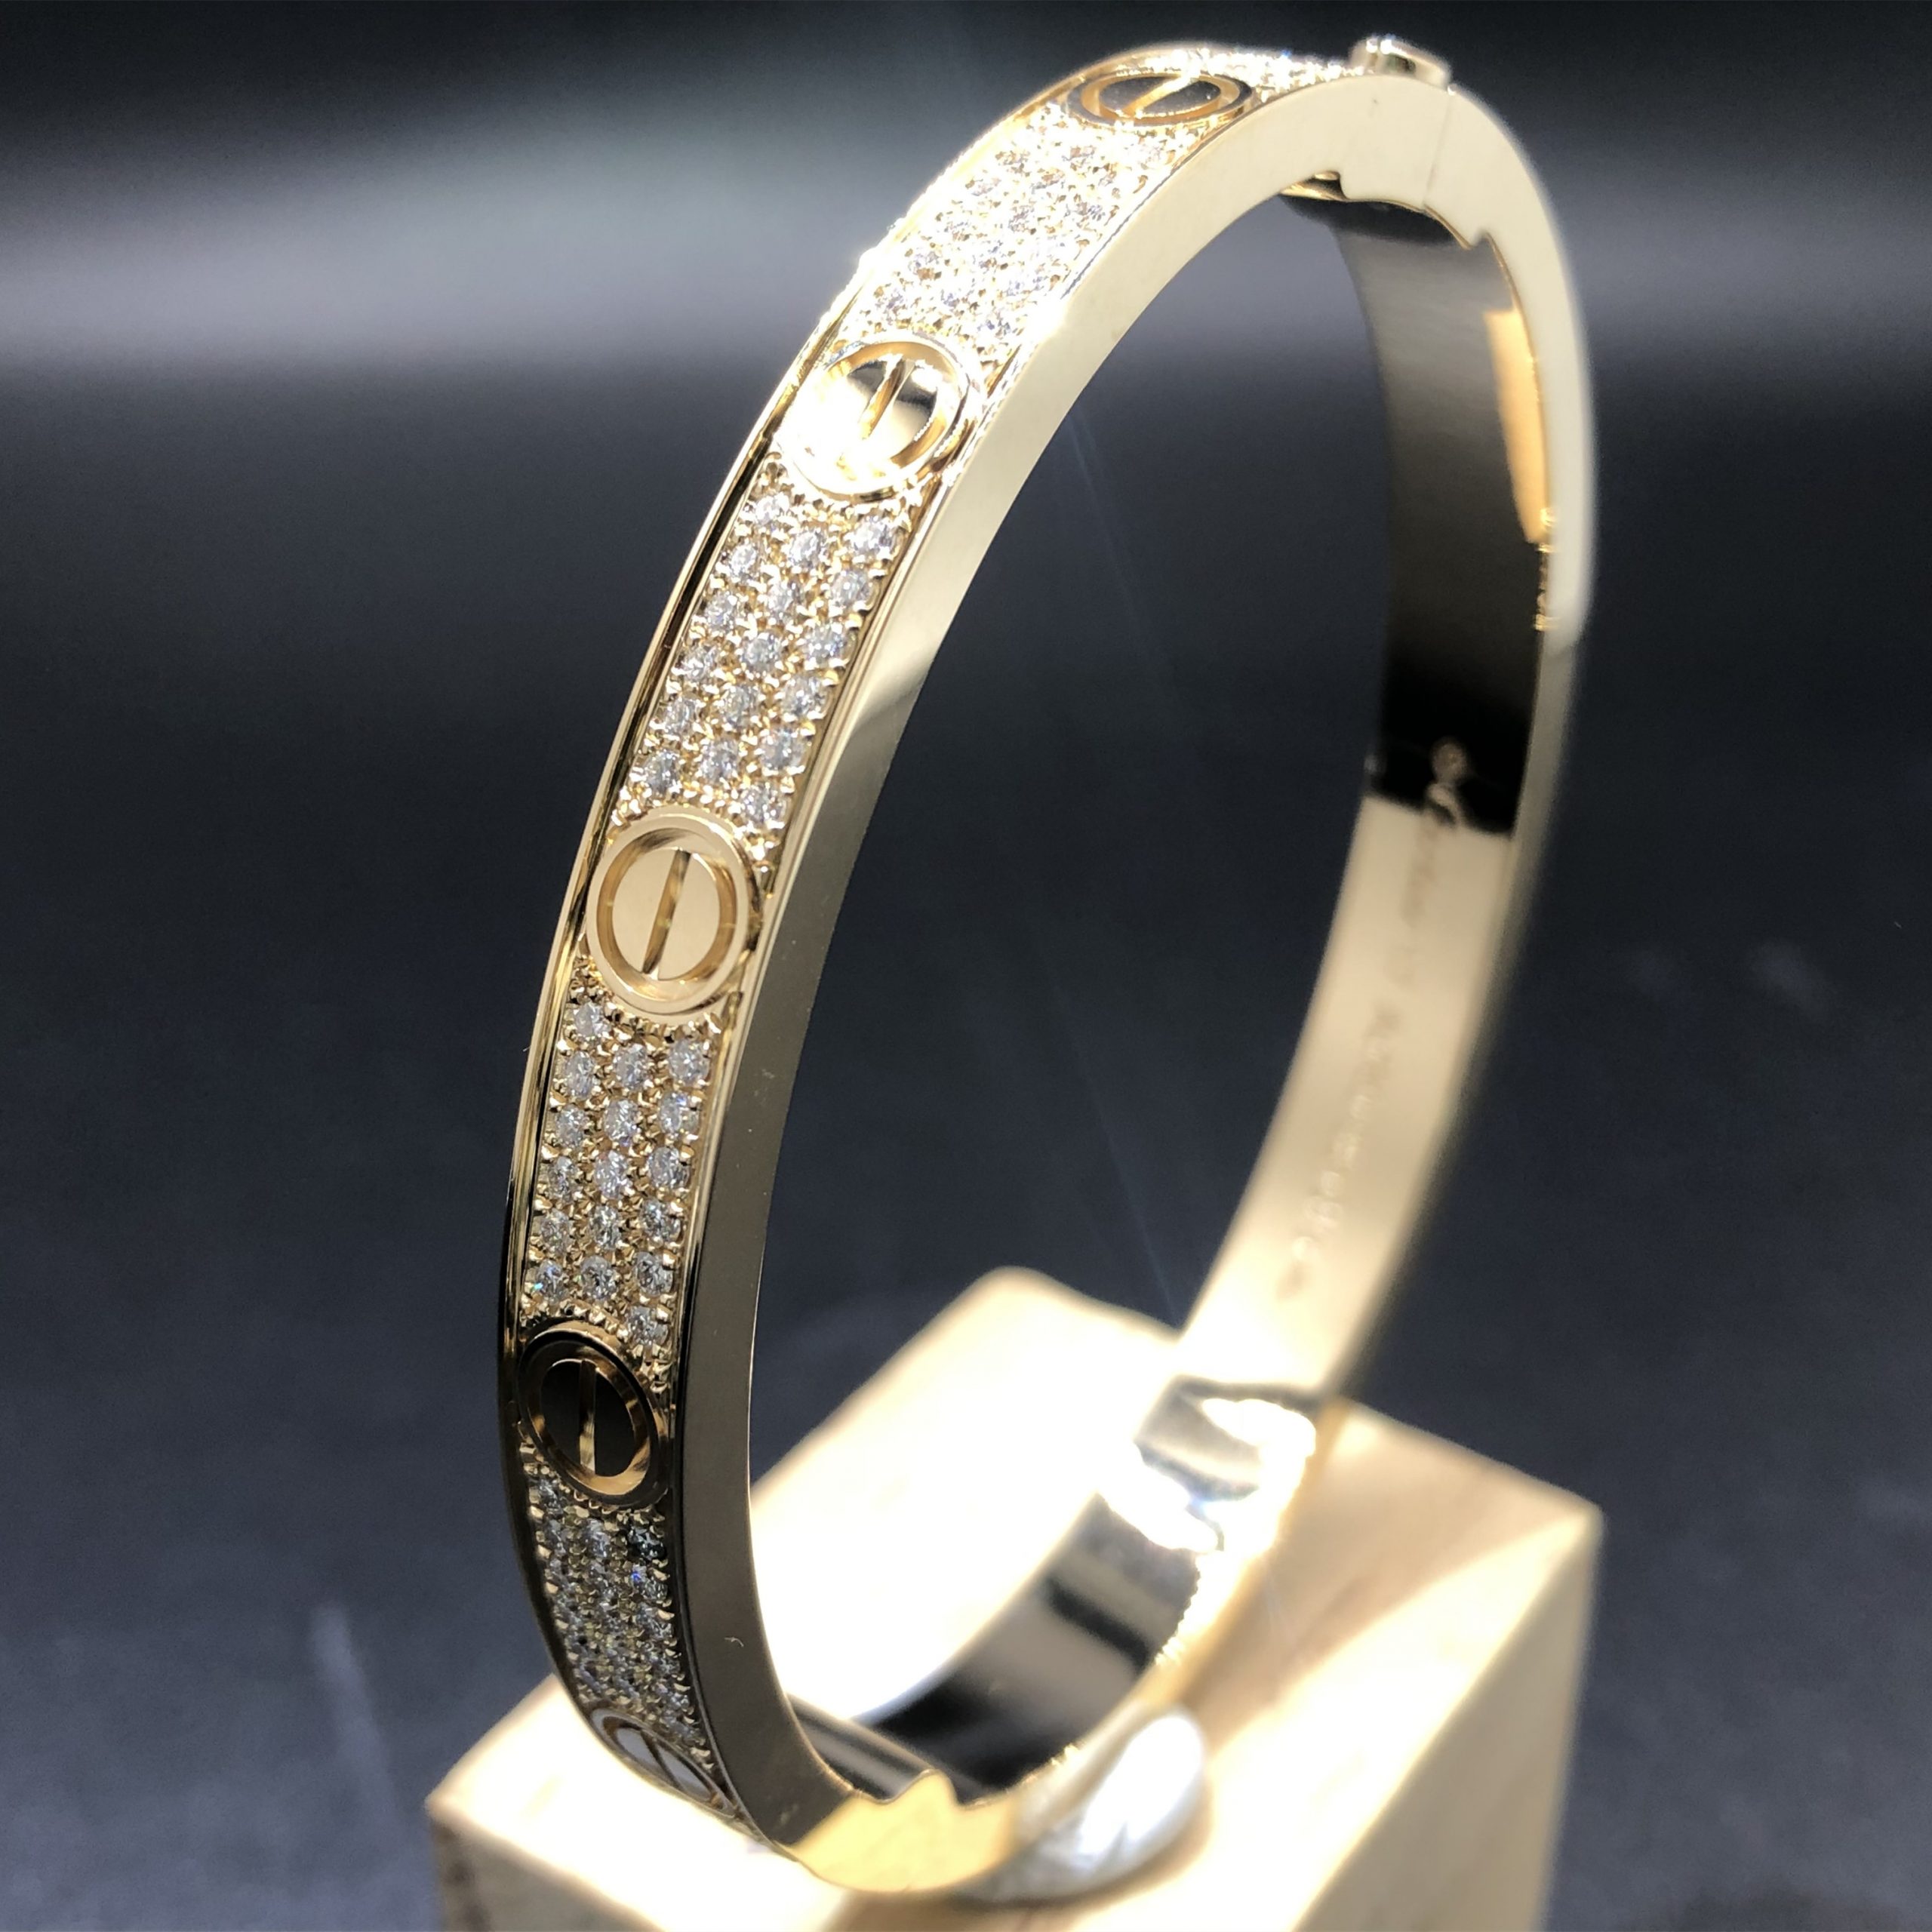 Custom Made Cartier Love Bracelet in Solid 18K Yellow Gold with 204 Diamonds-paved